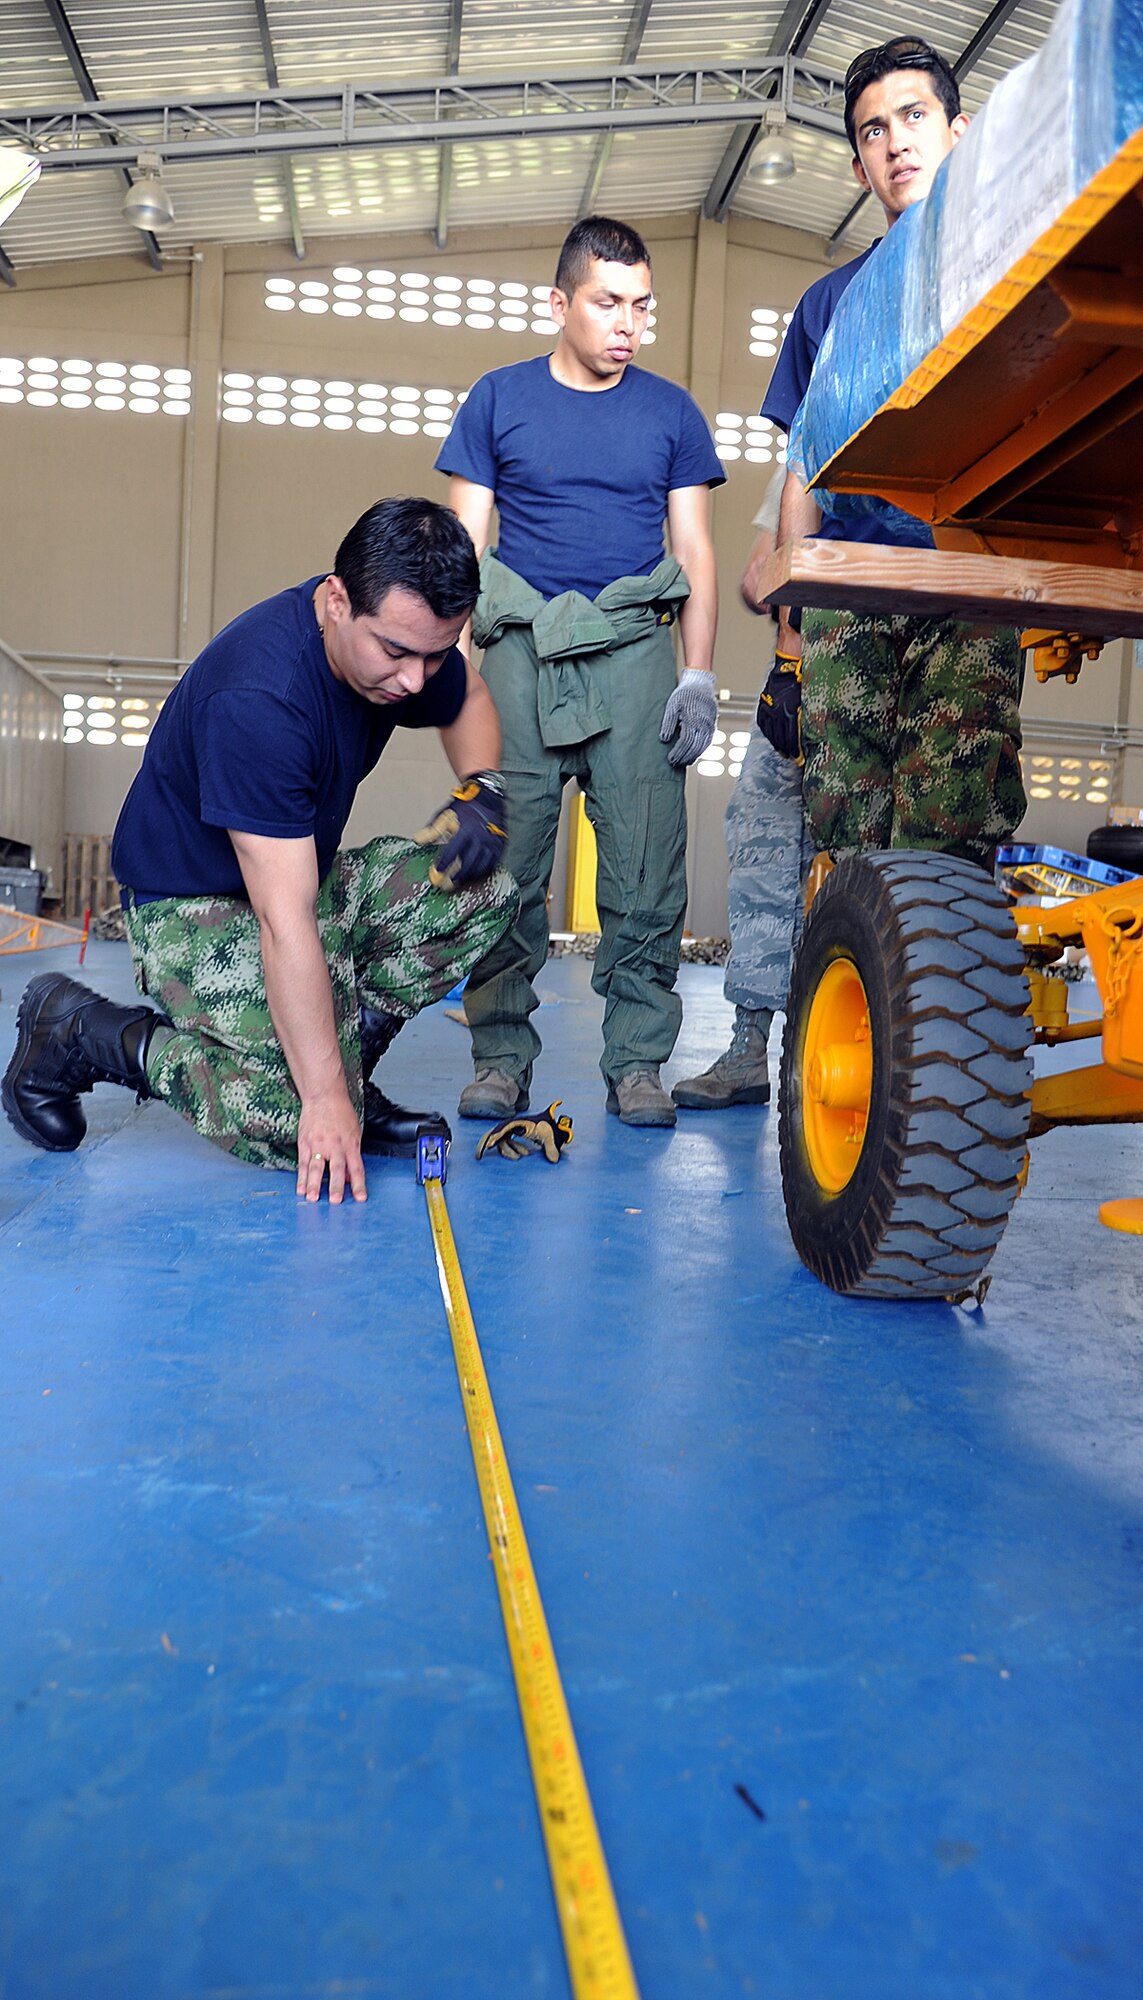 Members of the Colombian air force take measurements on a generator for loading onto aircraft during an Air Mobility Command Building Partner Capacity mission at General Alberto Pauwels Rodriguez Air Base in Barranquilla, Colombia, June 27.  (U.S. Air Force photo by Tech. Sgt. Lesley Waters)